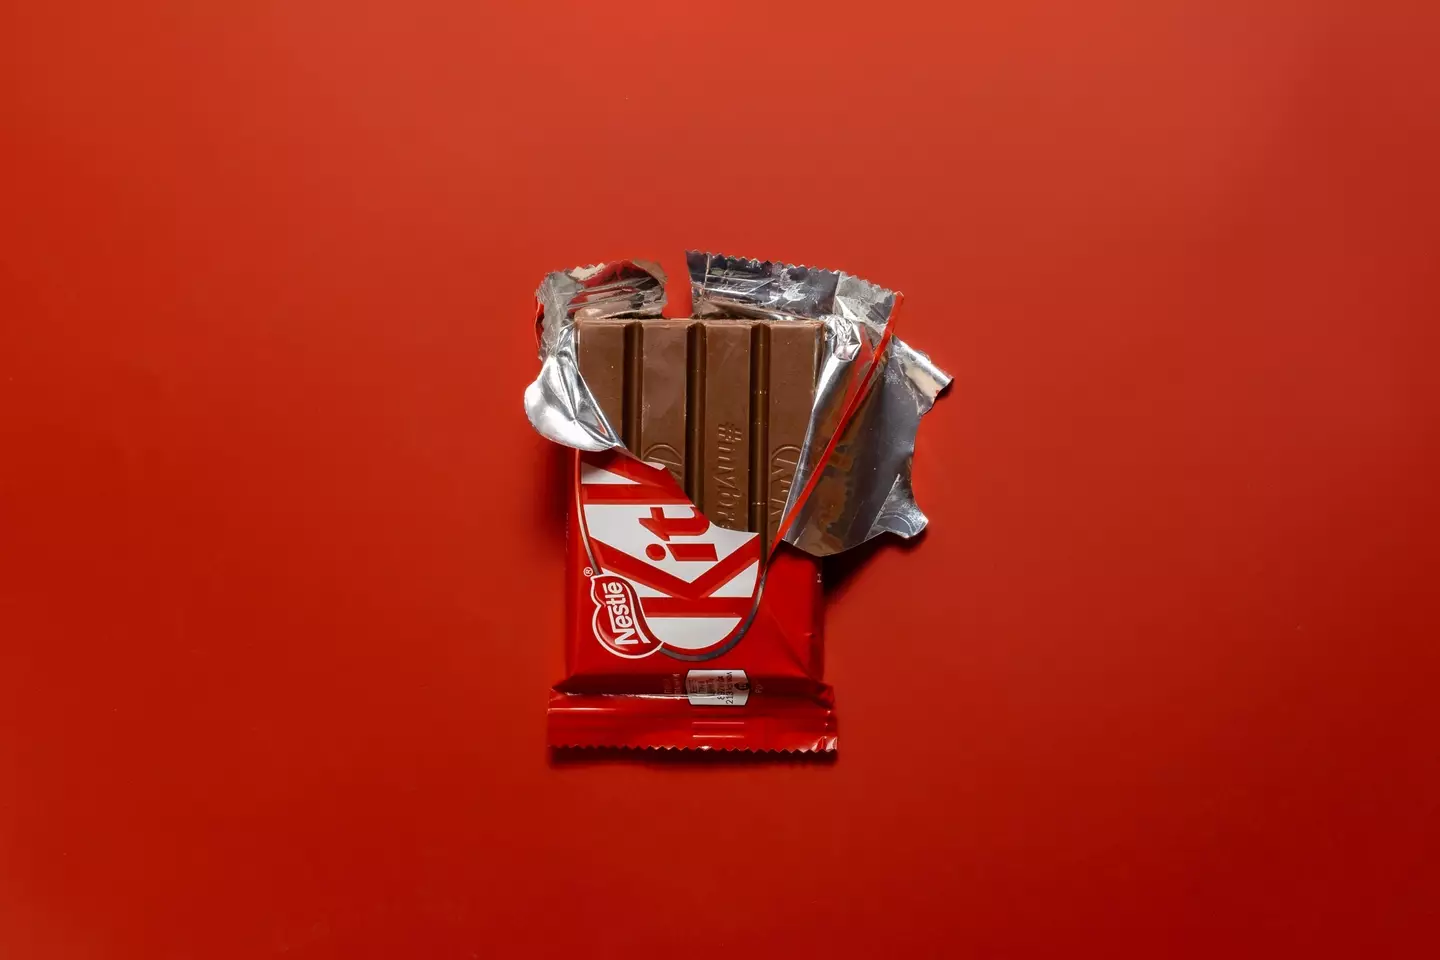 How do you eat your KitKat? (